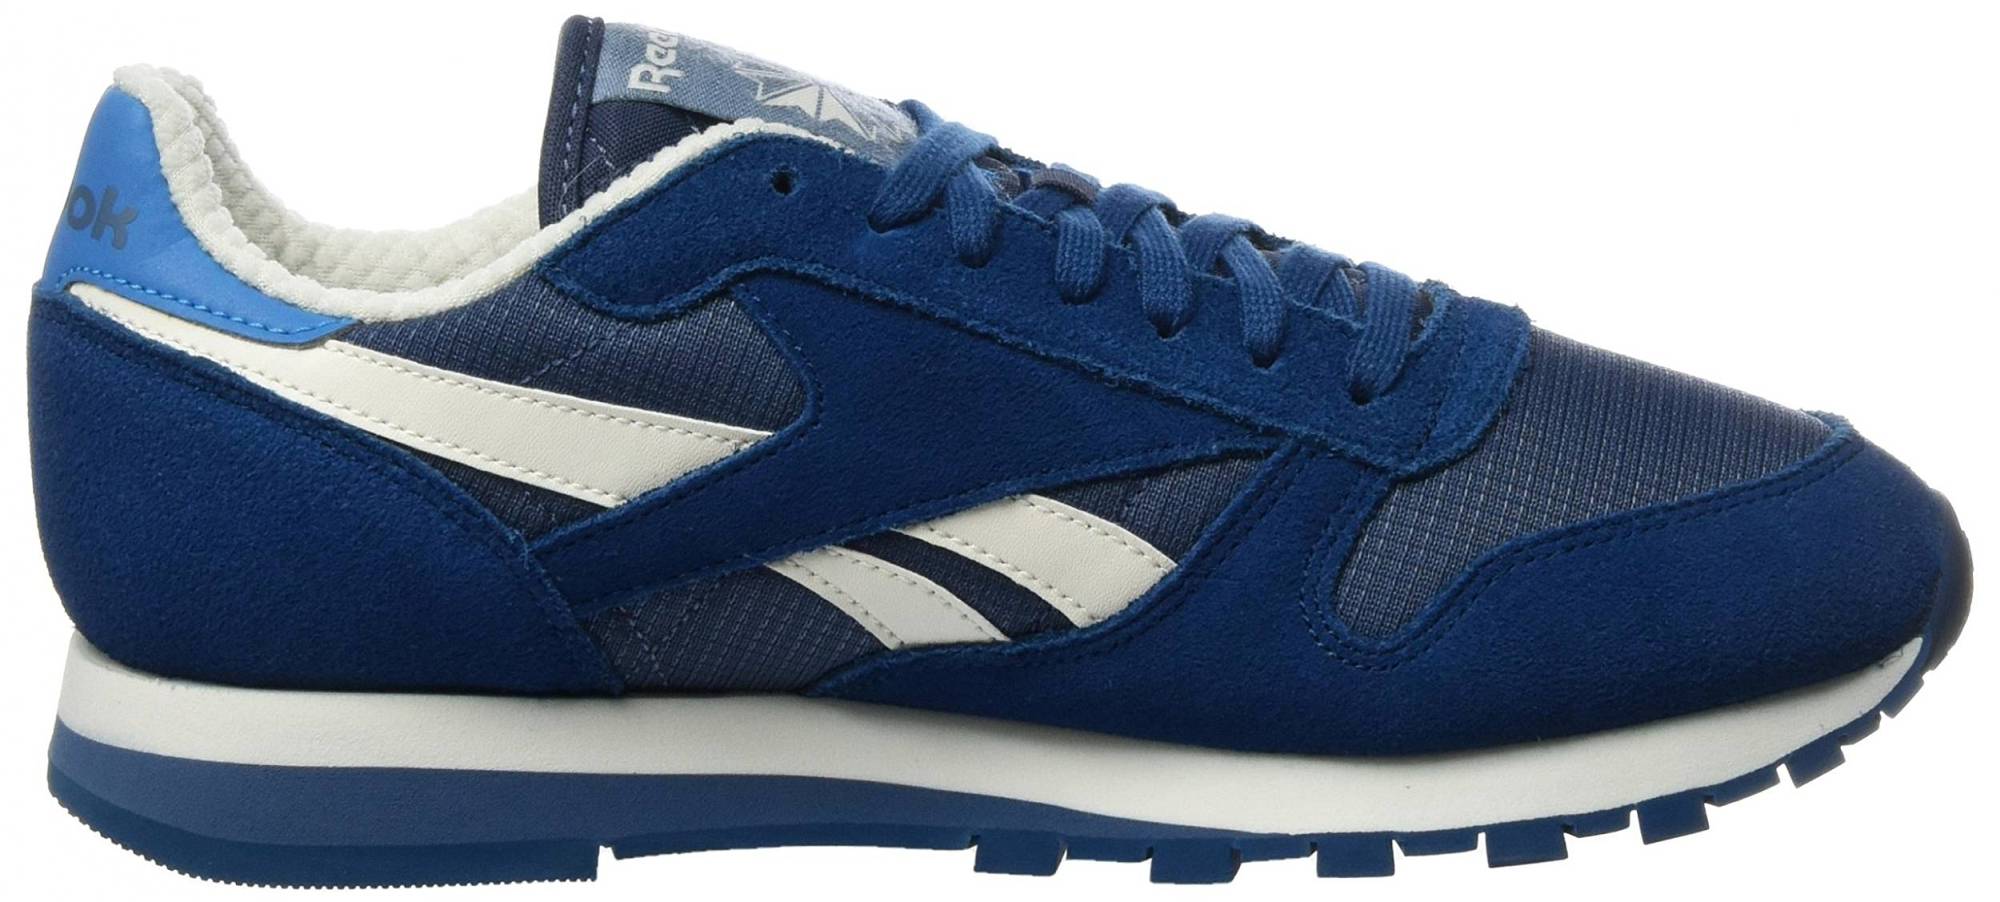 Reebok Classic Leather Camp – Shoes Reviews & Reasons To Buy